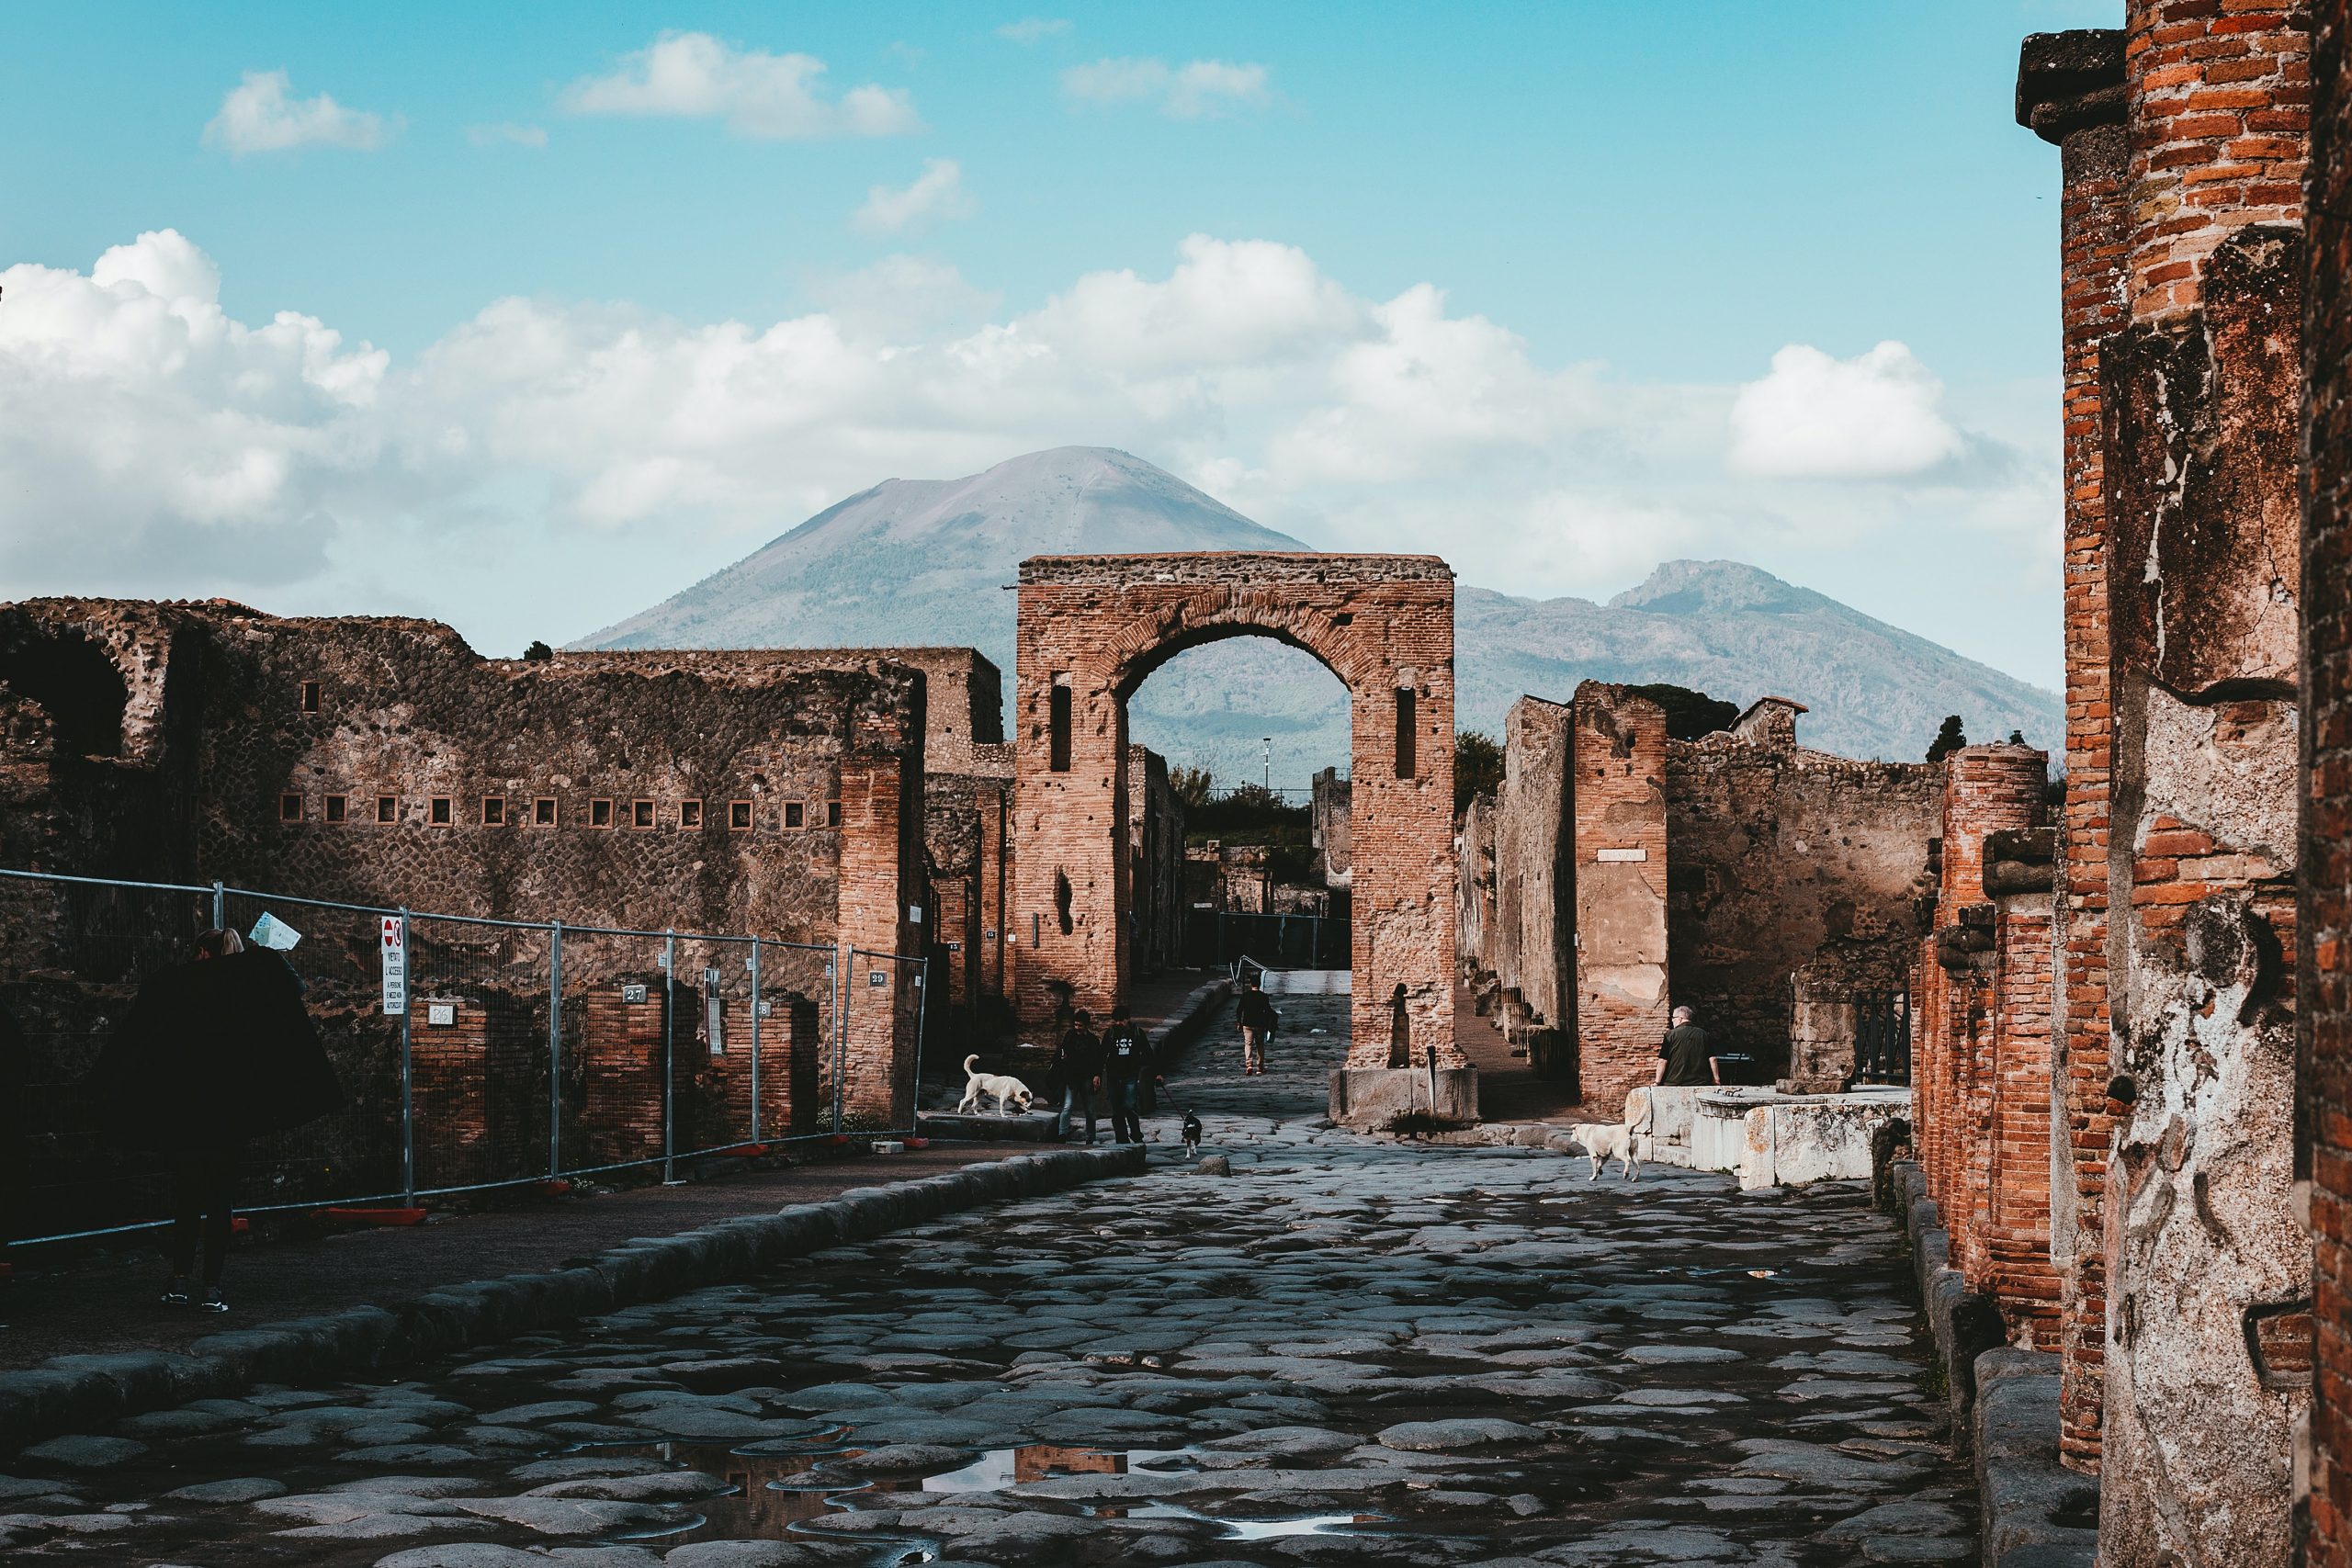 City of Pompeii with its ruins - makes an excellent day trip from Rome